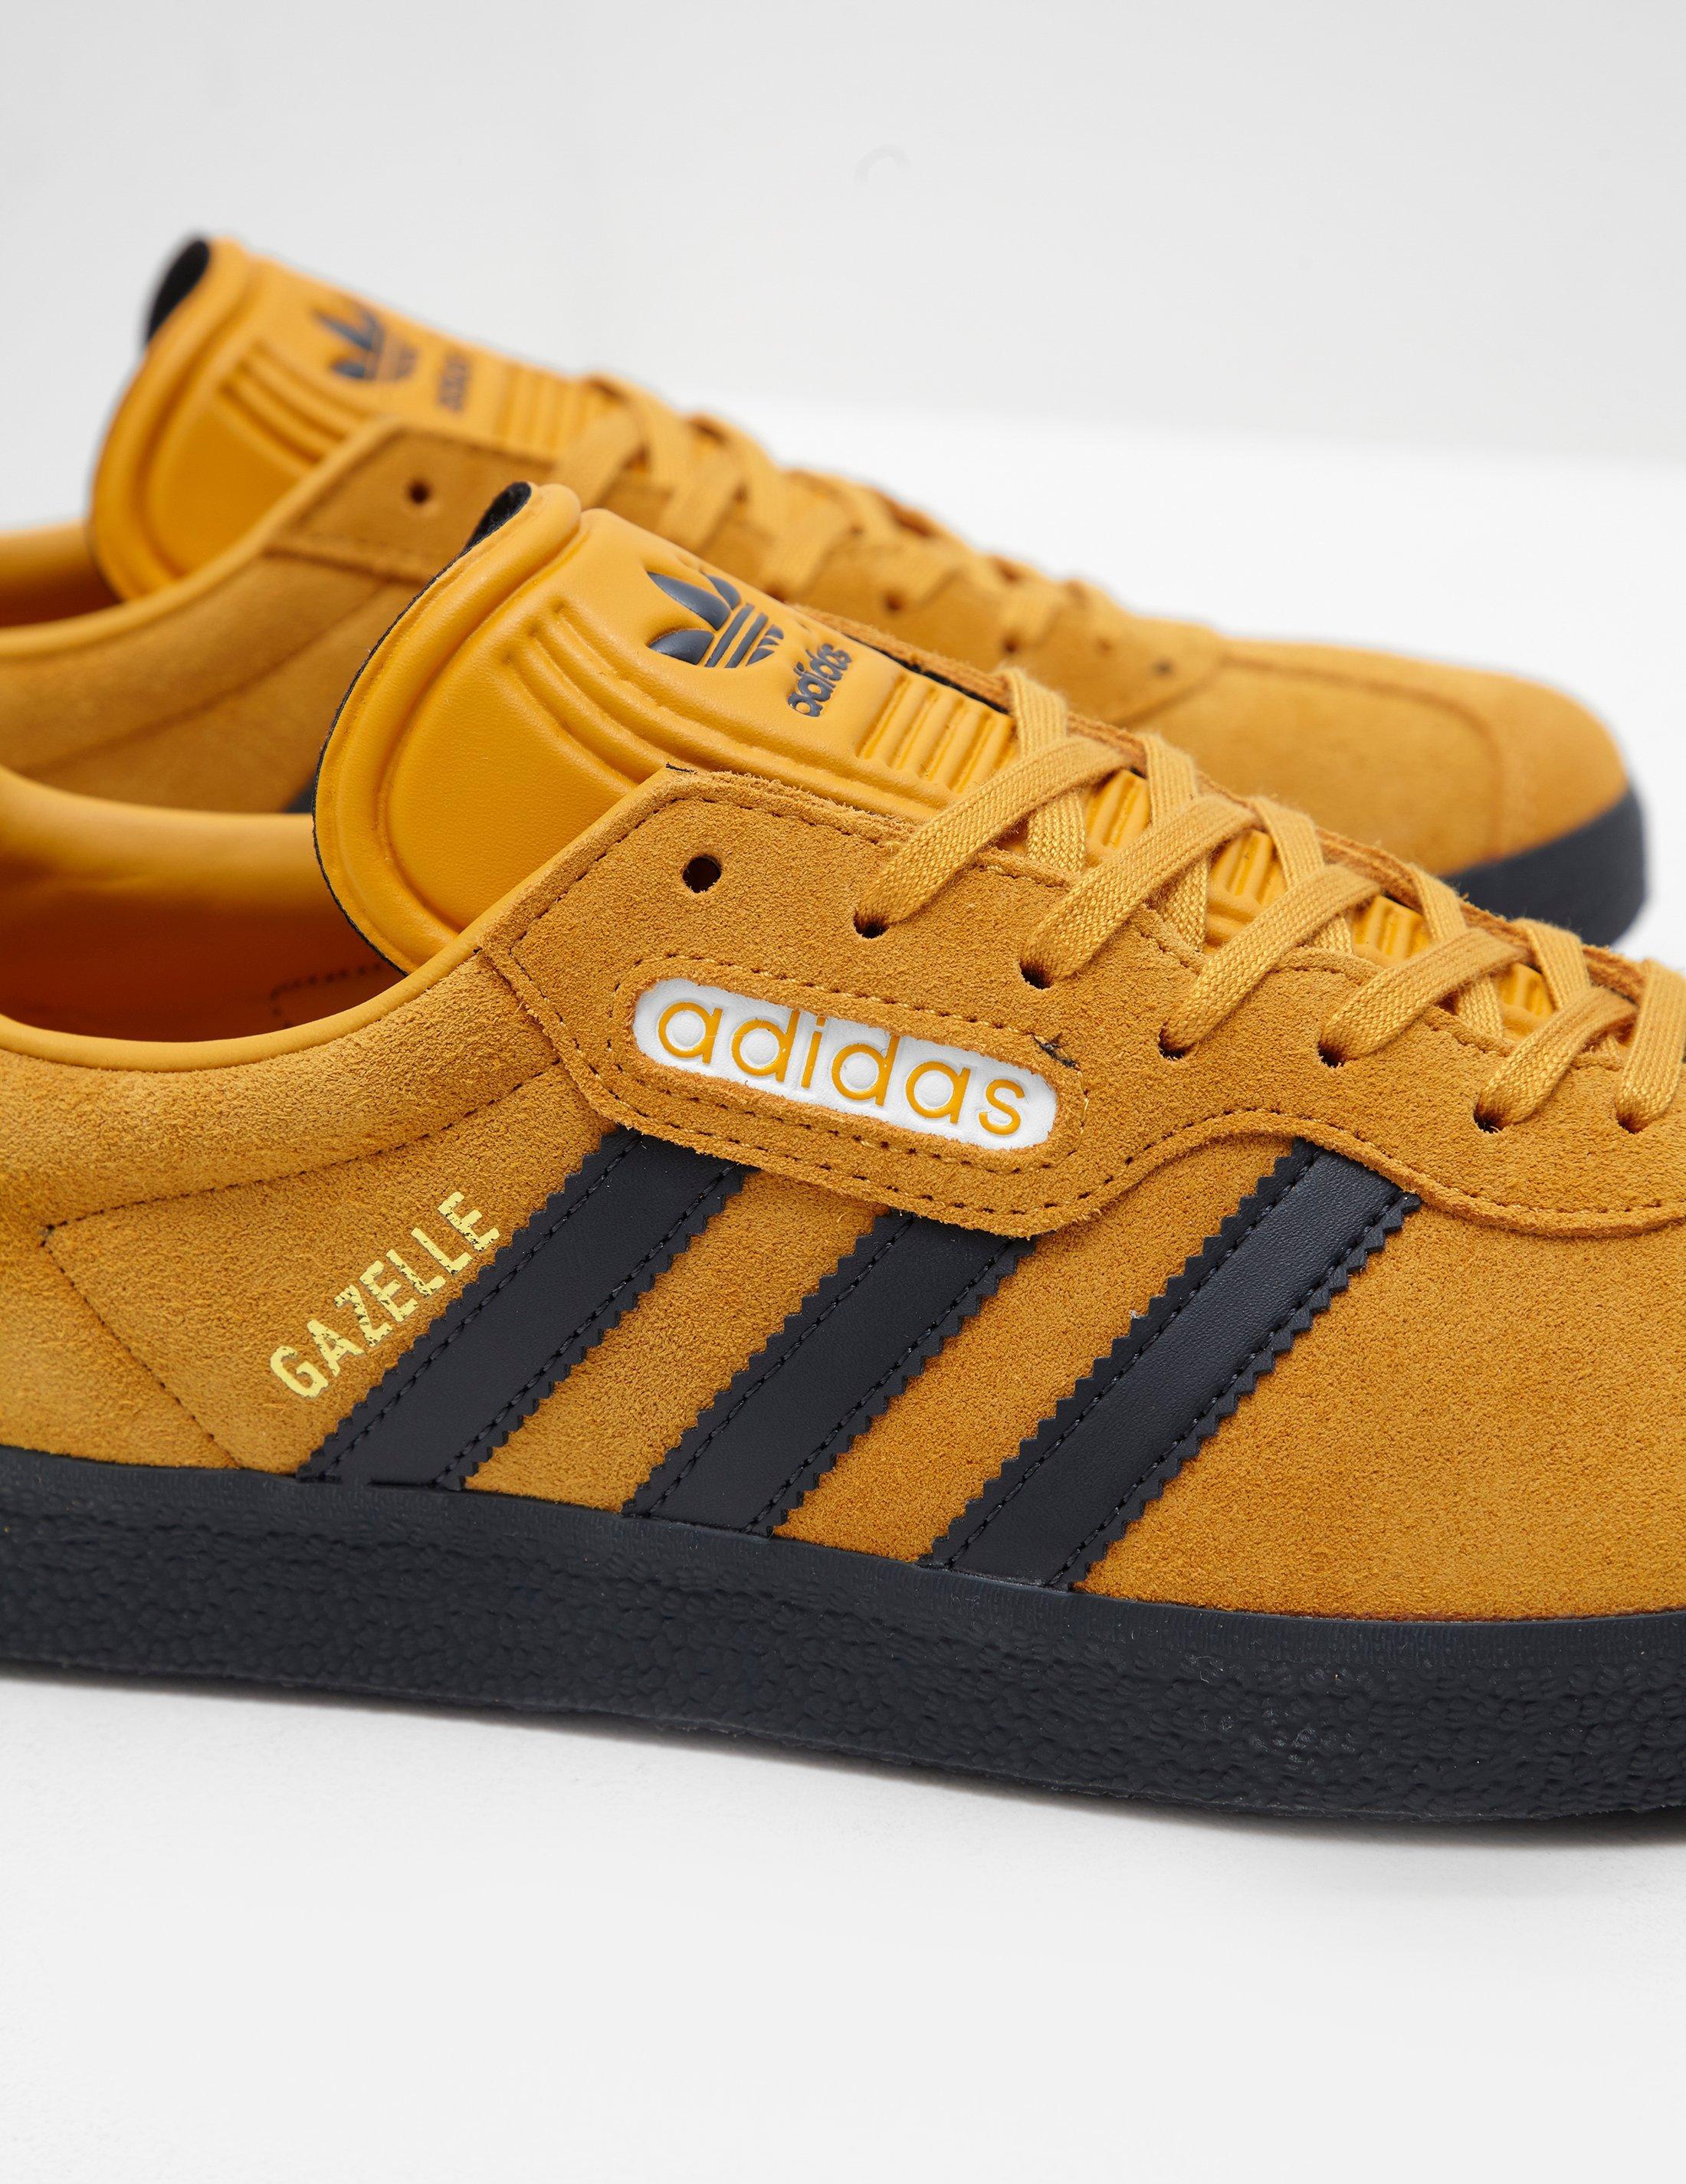 adidas suede yellow